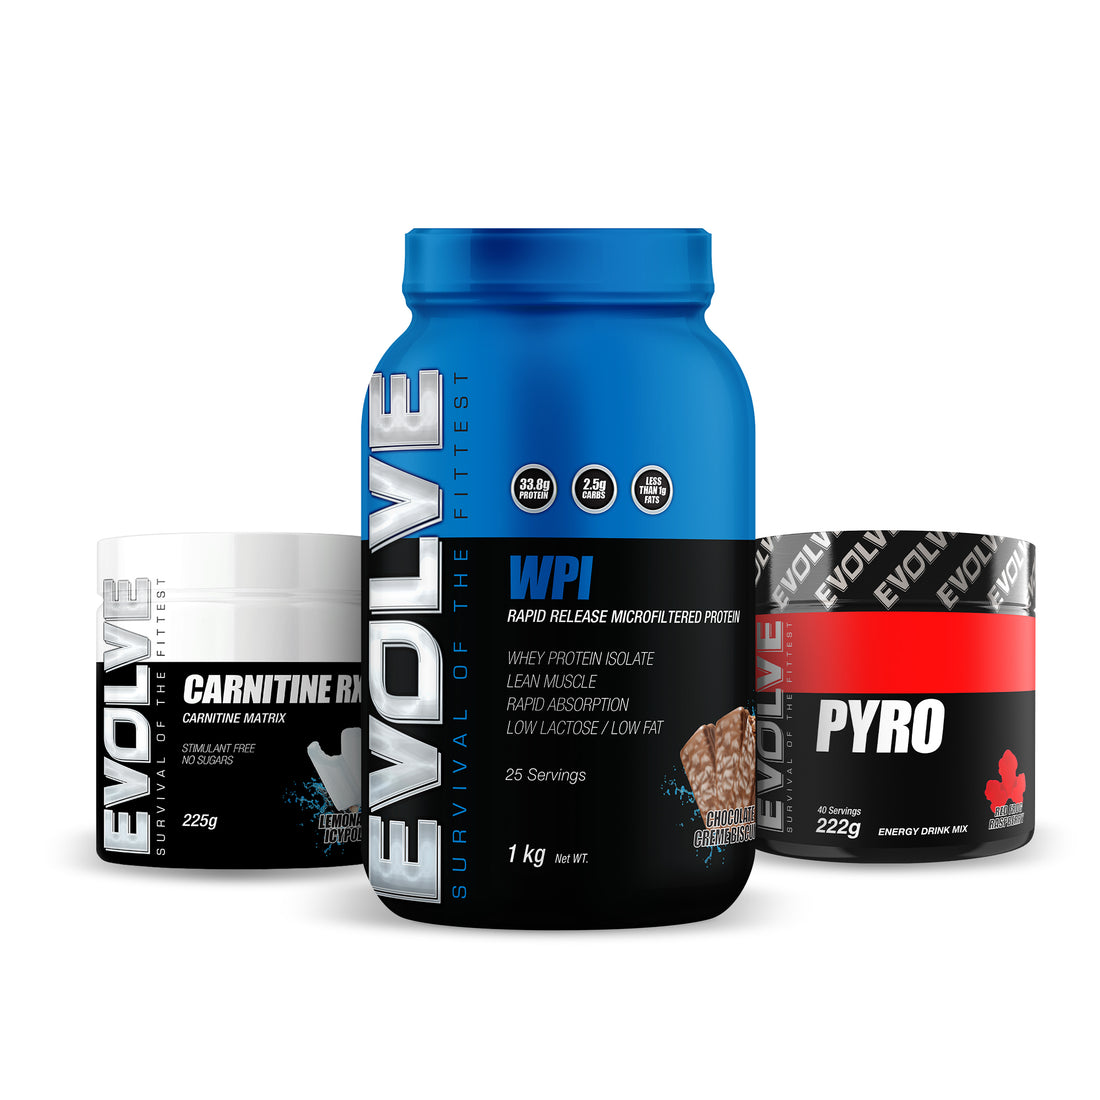 Evolve Nutrition supplement favourites pack featuring Evolve WPI protein powder, Evolve Pyro pre workout and Evolve Carnitine RX products.